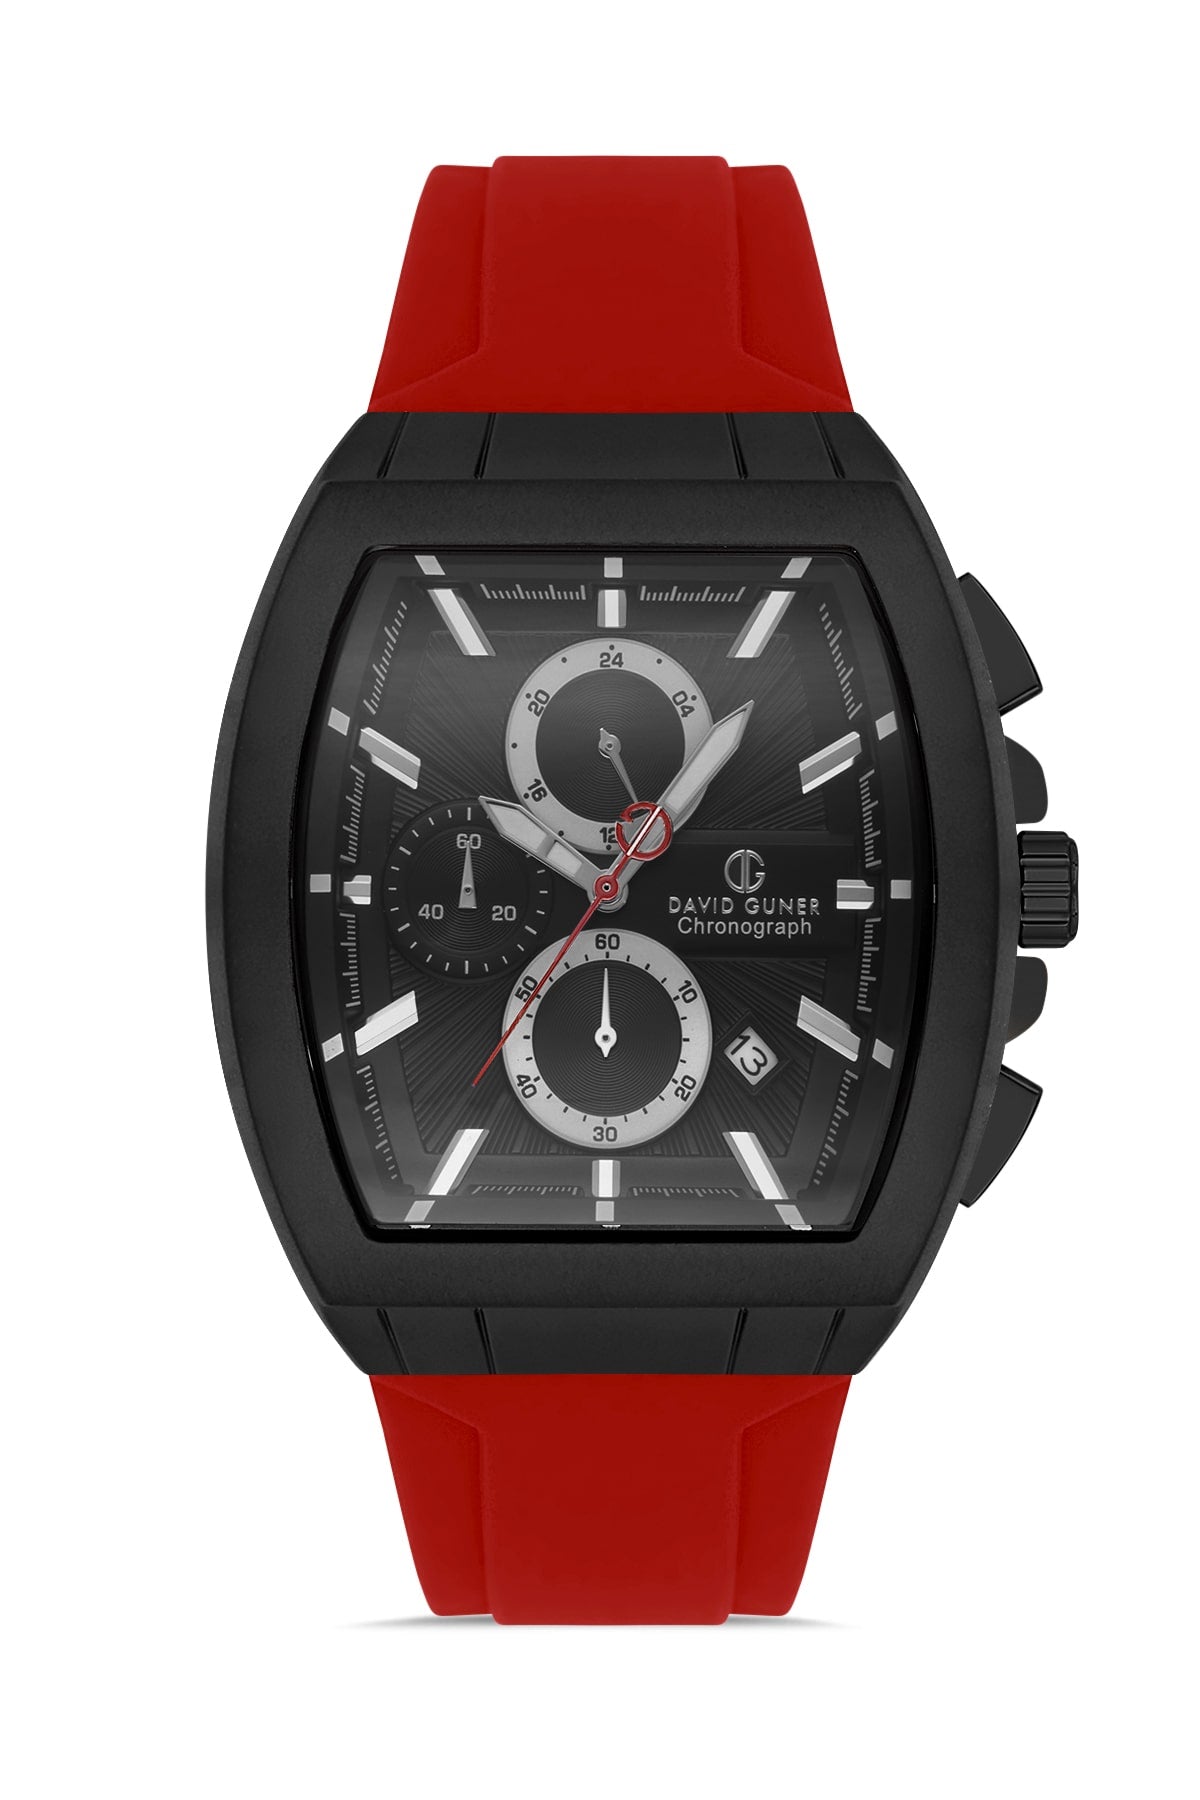 DAVID GUNER Gun Coated Men's Wristwatch with Black Dial and Red Silicone Strap